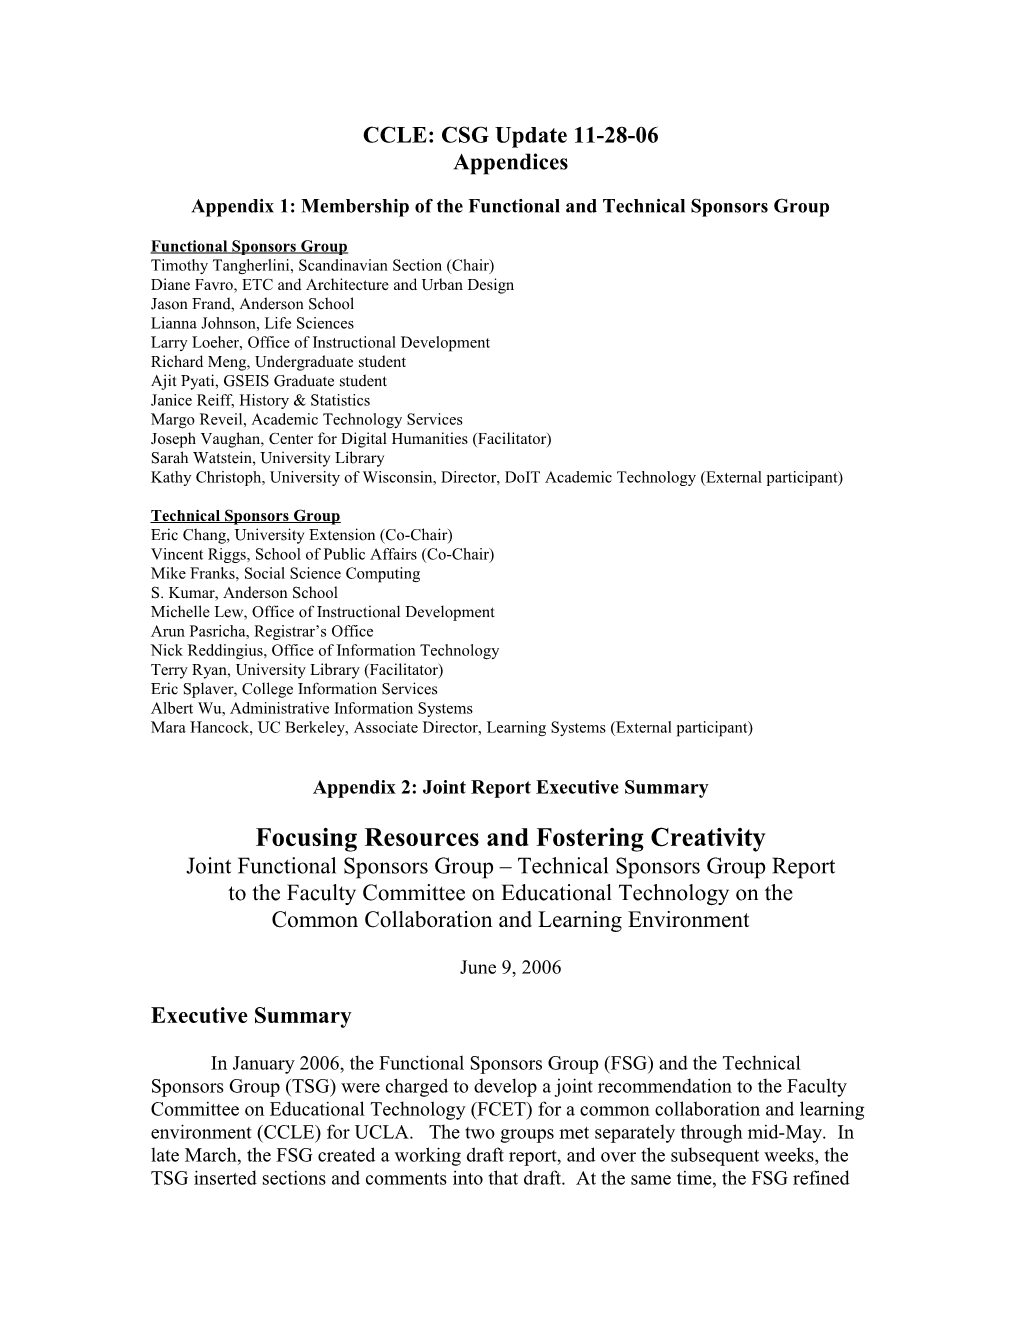 Appendix 1: Membership of the Functional and Technical Sponsors Group